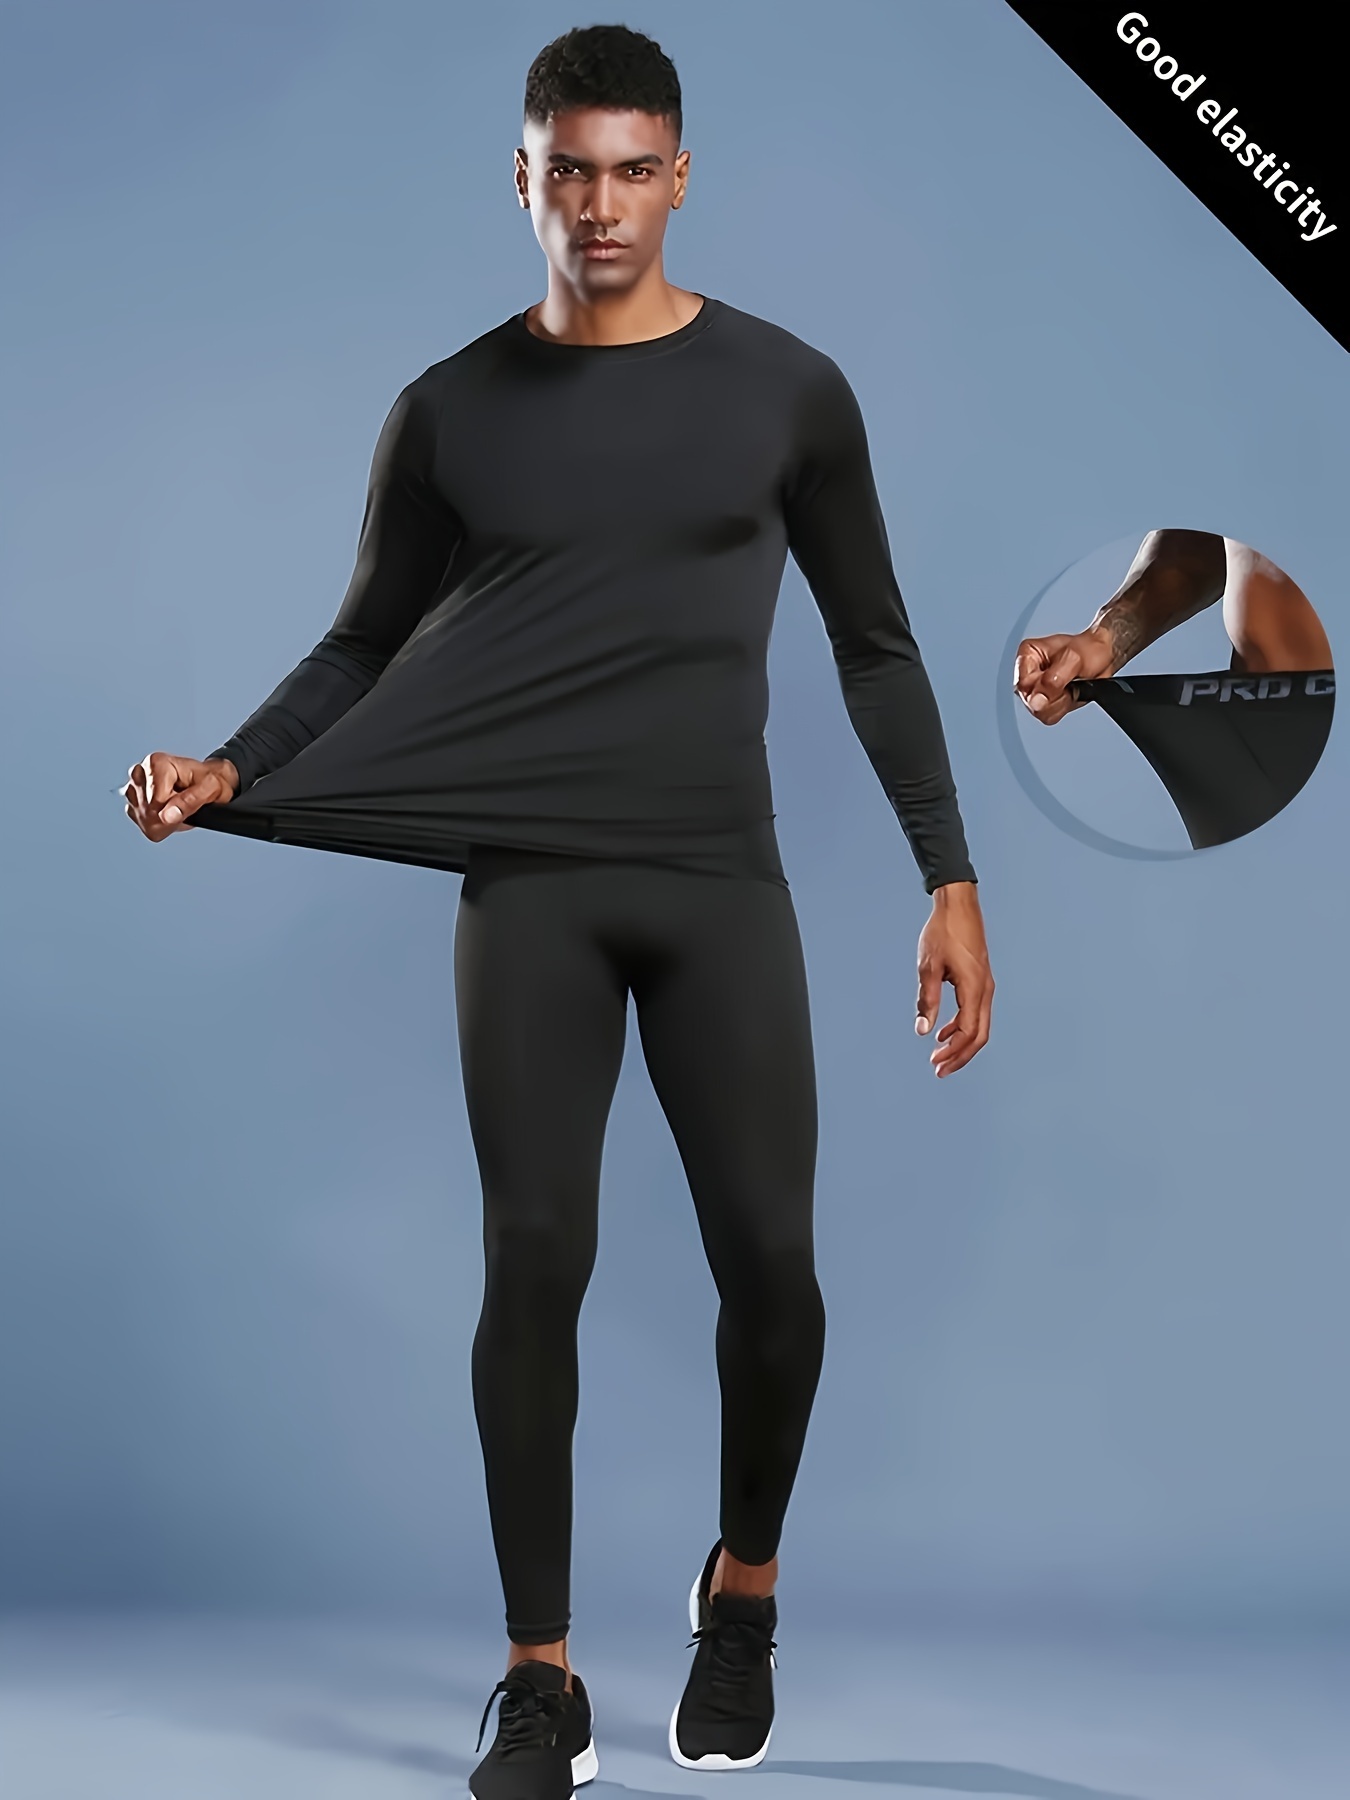 Mens Thermal Pants Underwear Warm Pants with Pocket Running Leggings  Trainning Quick Dry Compression Tights Leggings